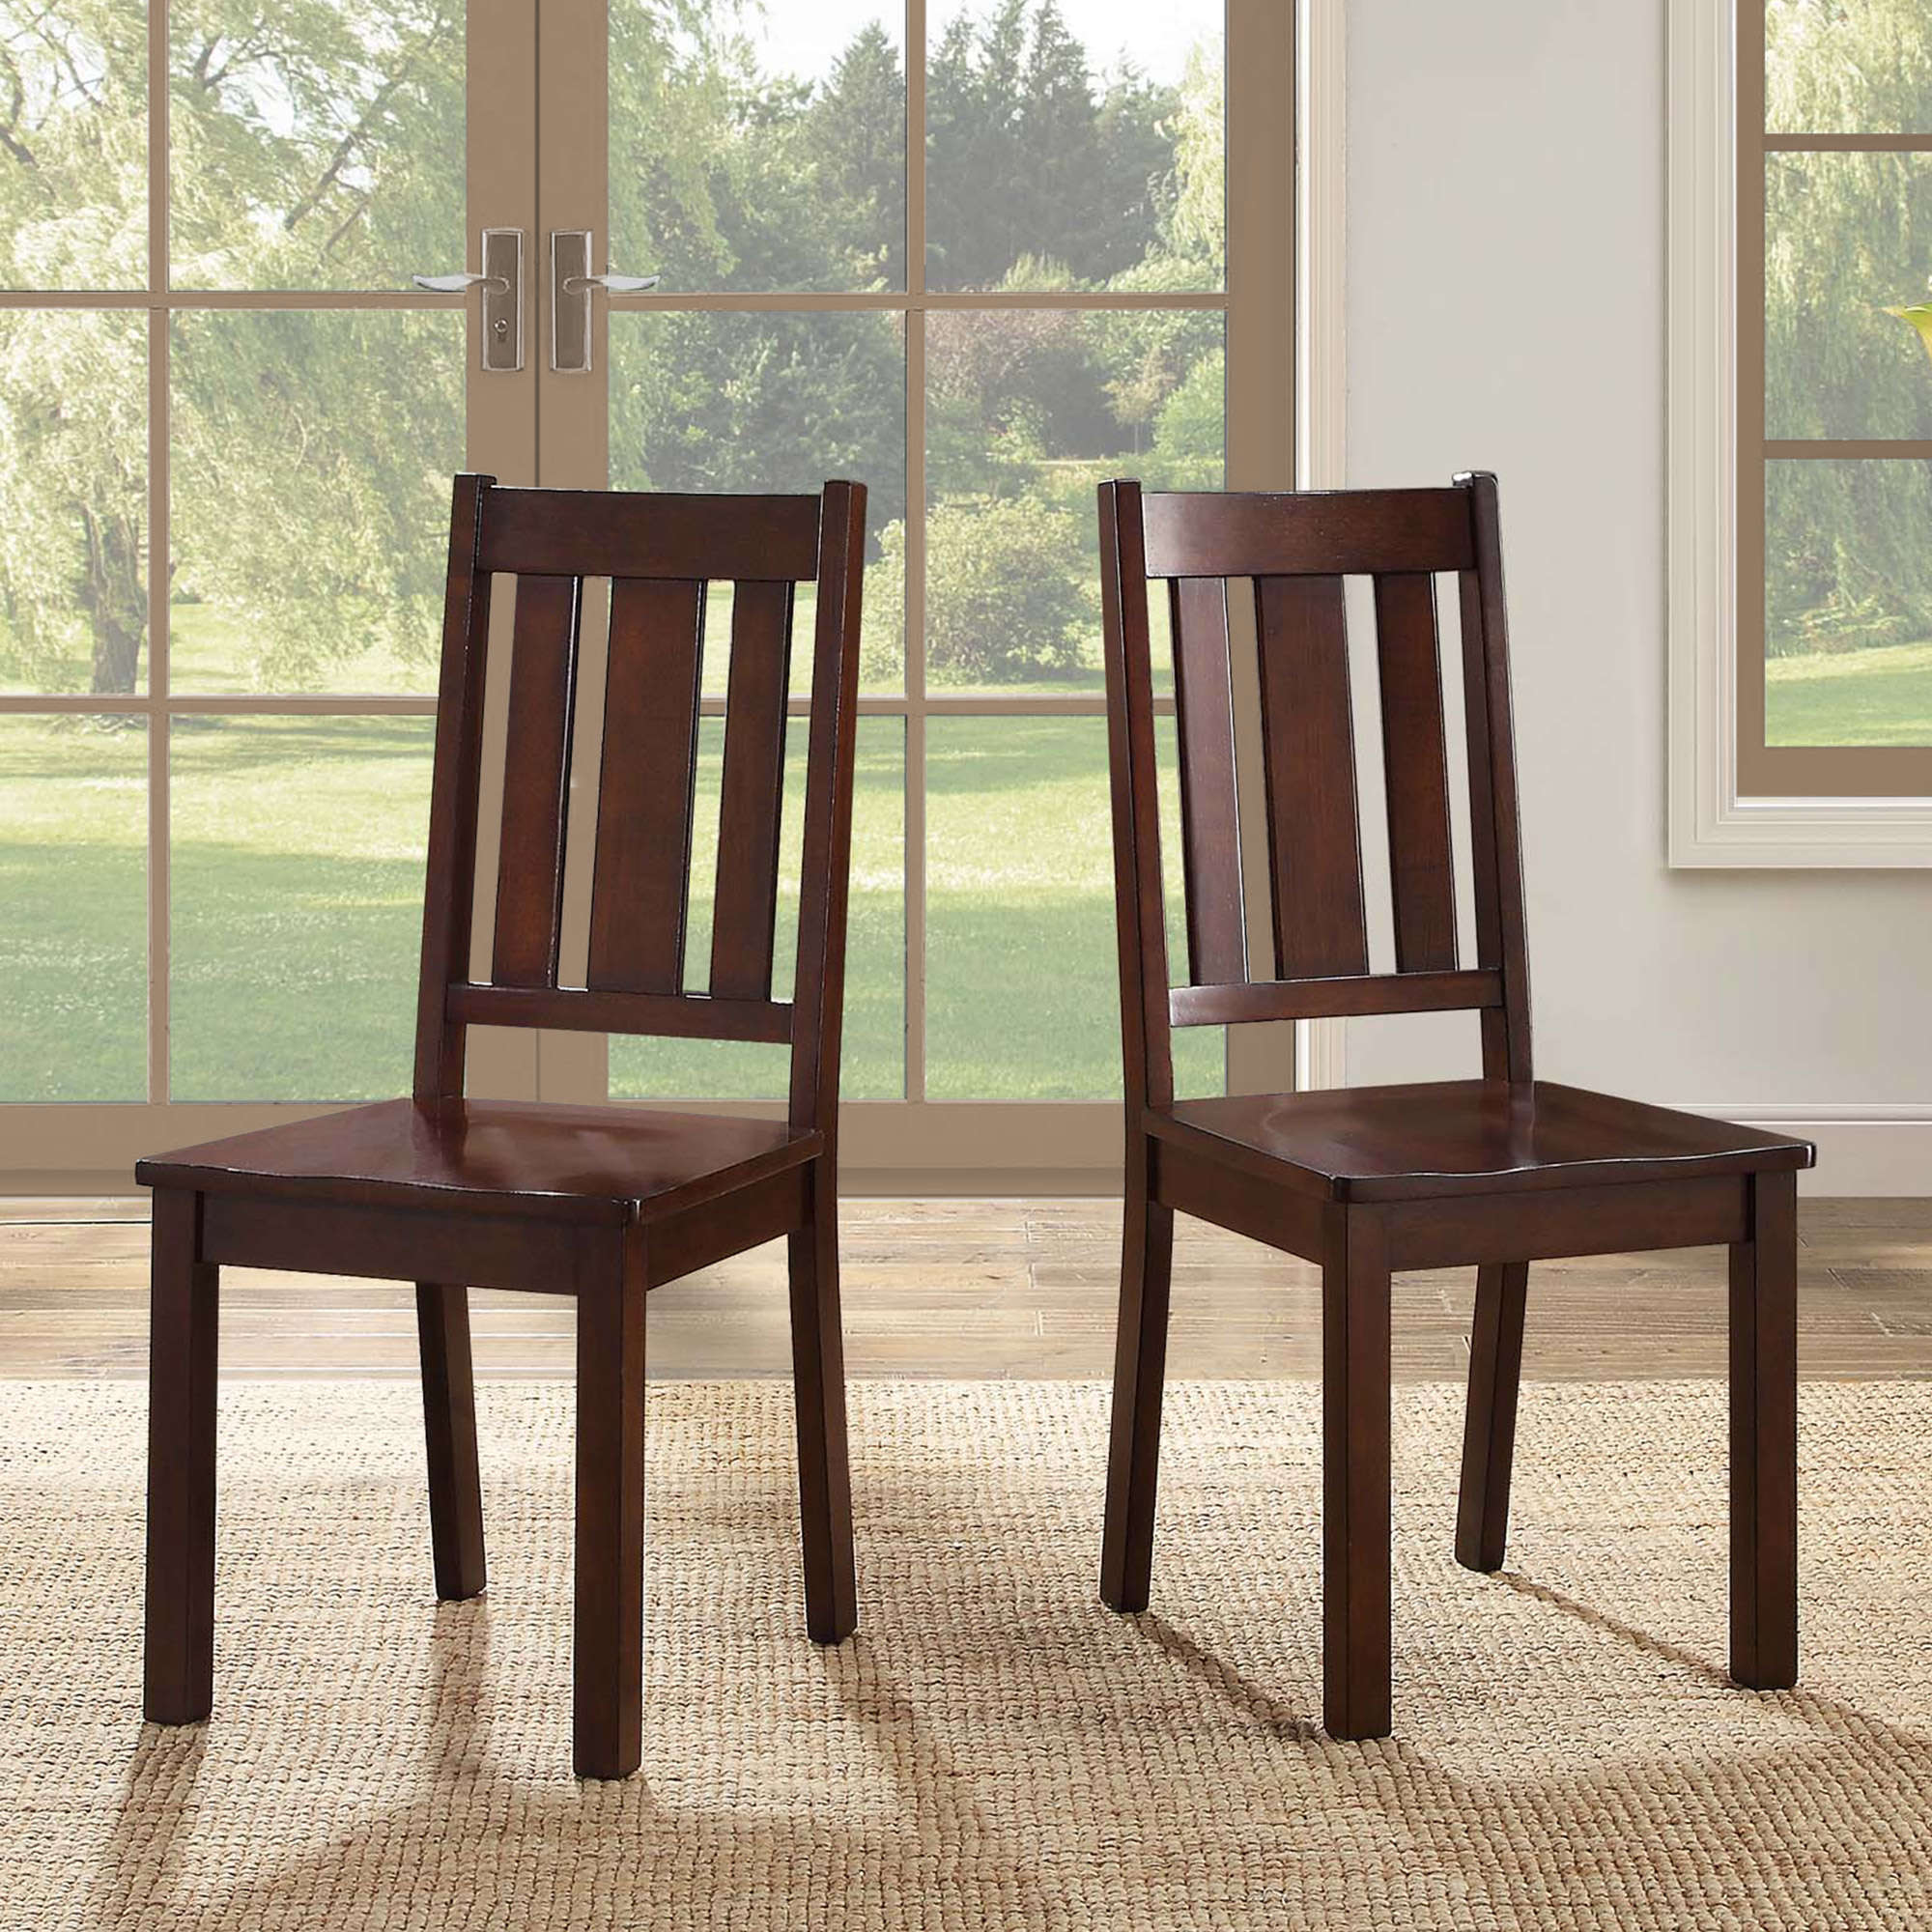 Better Homes and Gardens Bankston Dining Chair, Set of 2, Mocha -  Traveller Location